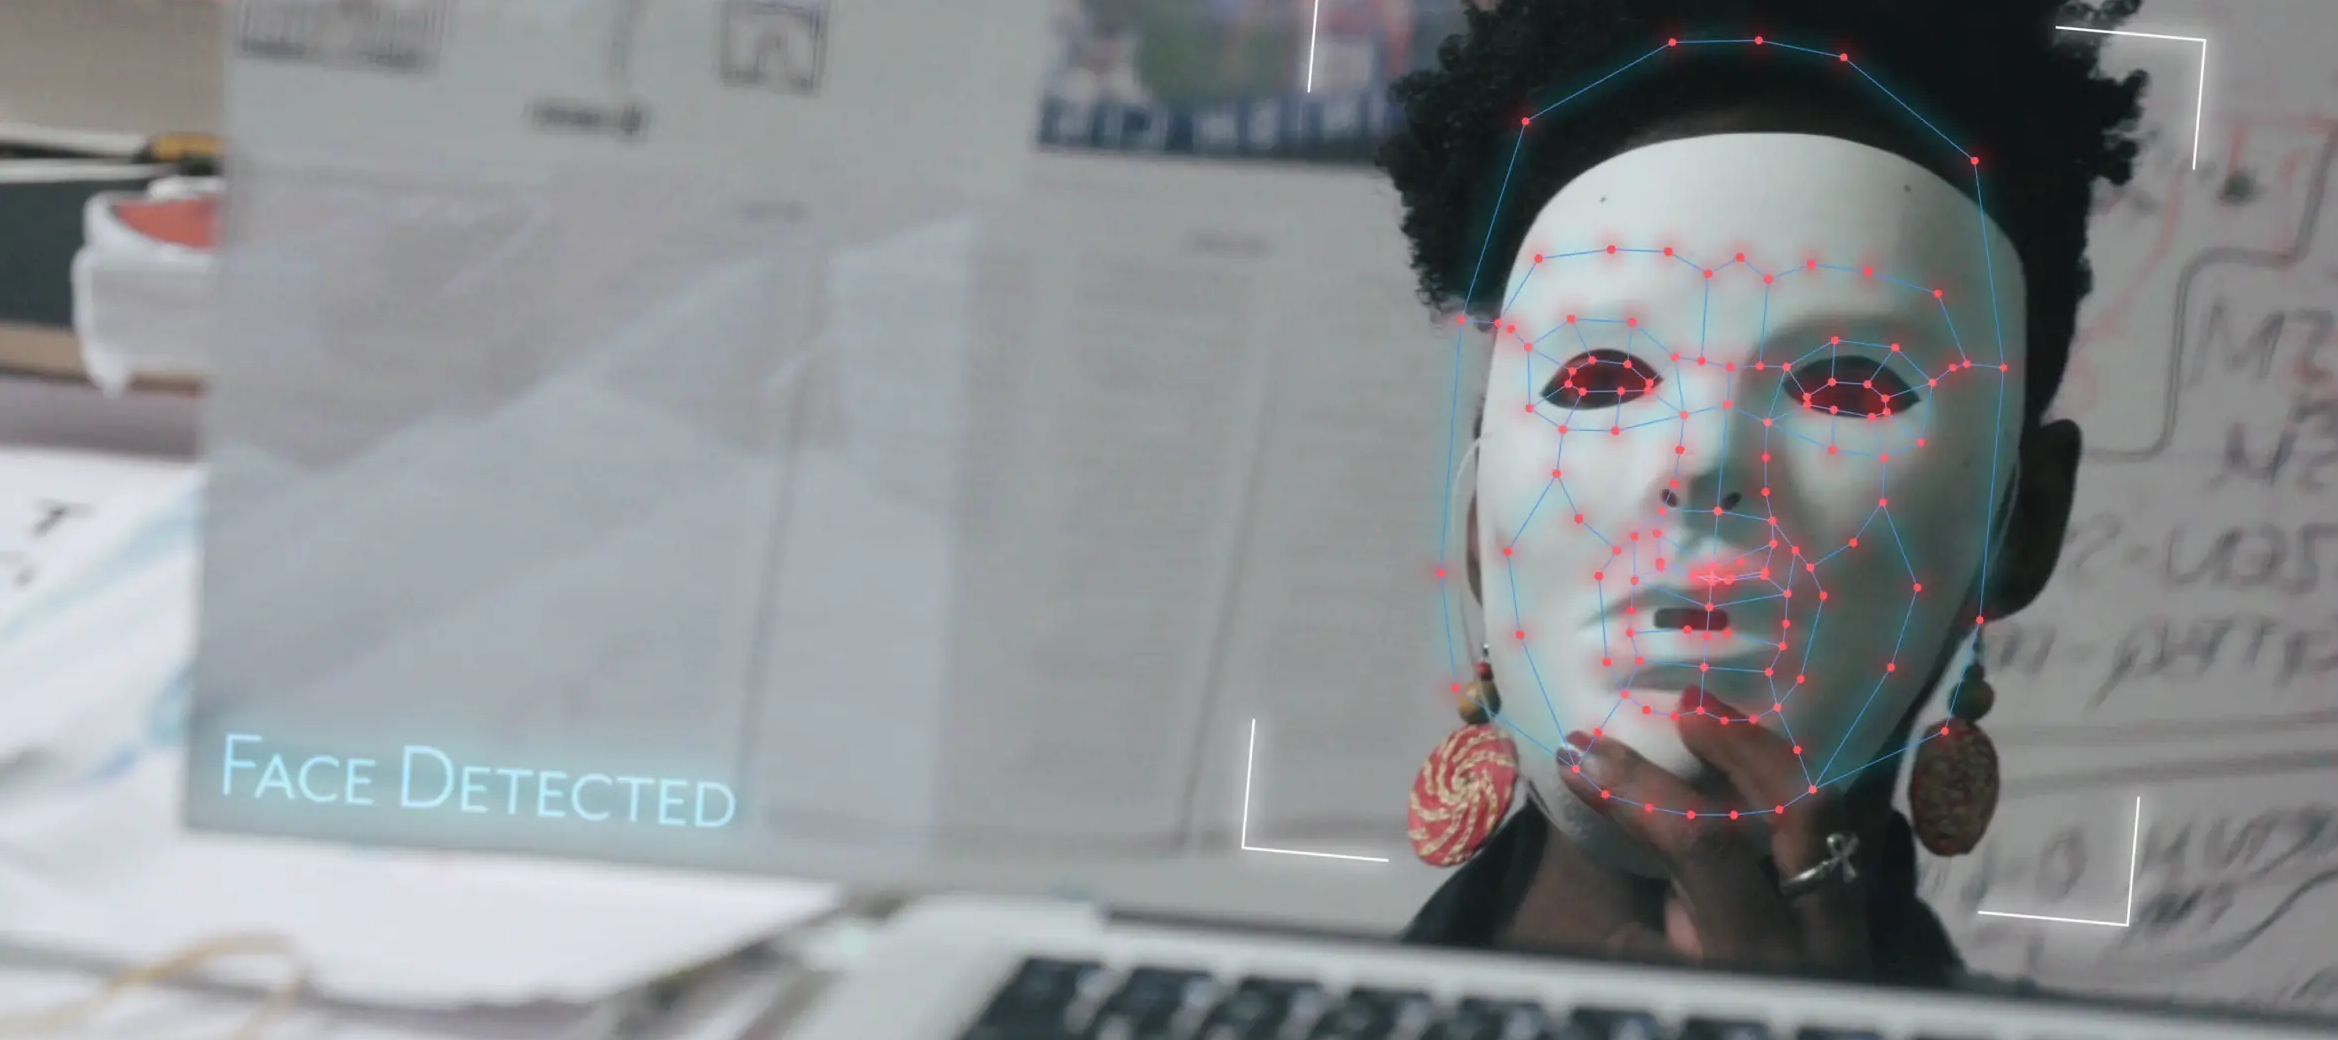 A computer screen shows a dark-skinned adult woman with short, dark, bushy hair holds up a smooth, white mask to obscure her face. Layered over the mask are a constellation of red dots connected by blue lines, and in the corner of the screen are the words ‘Face Detected.’